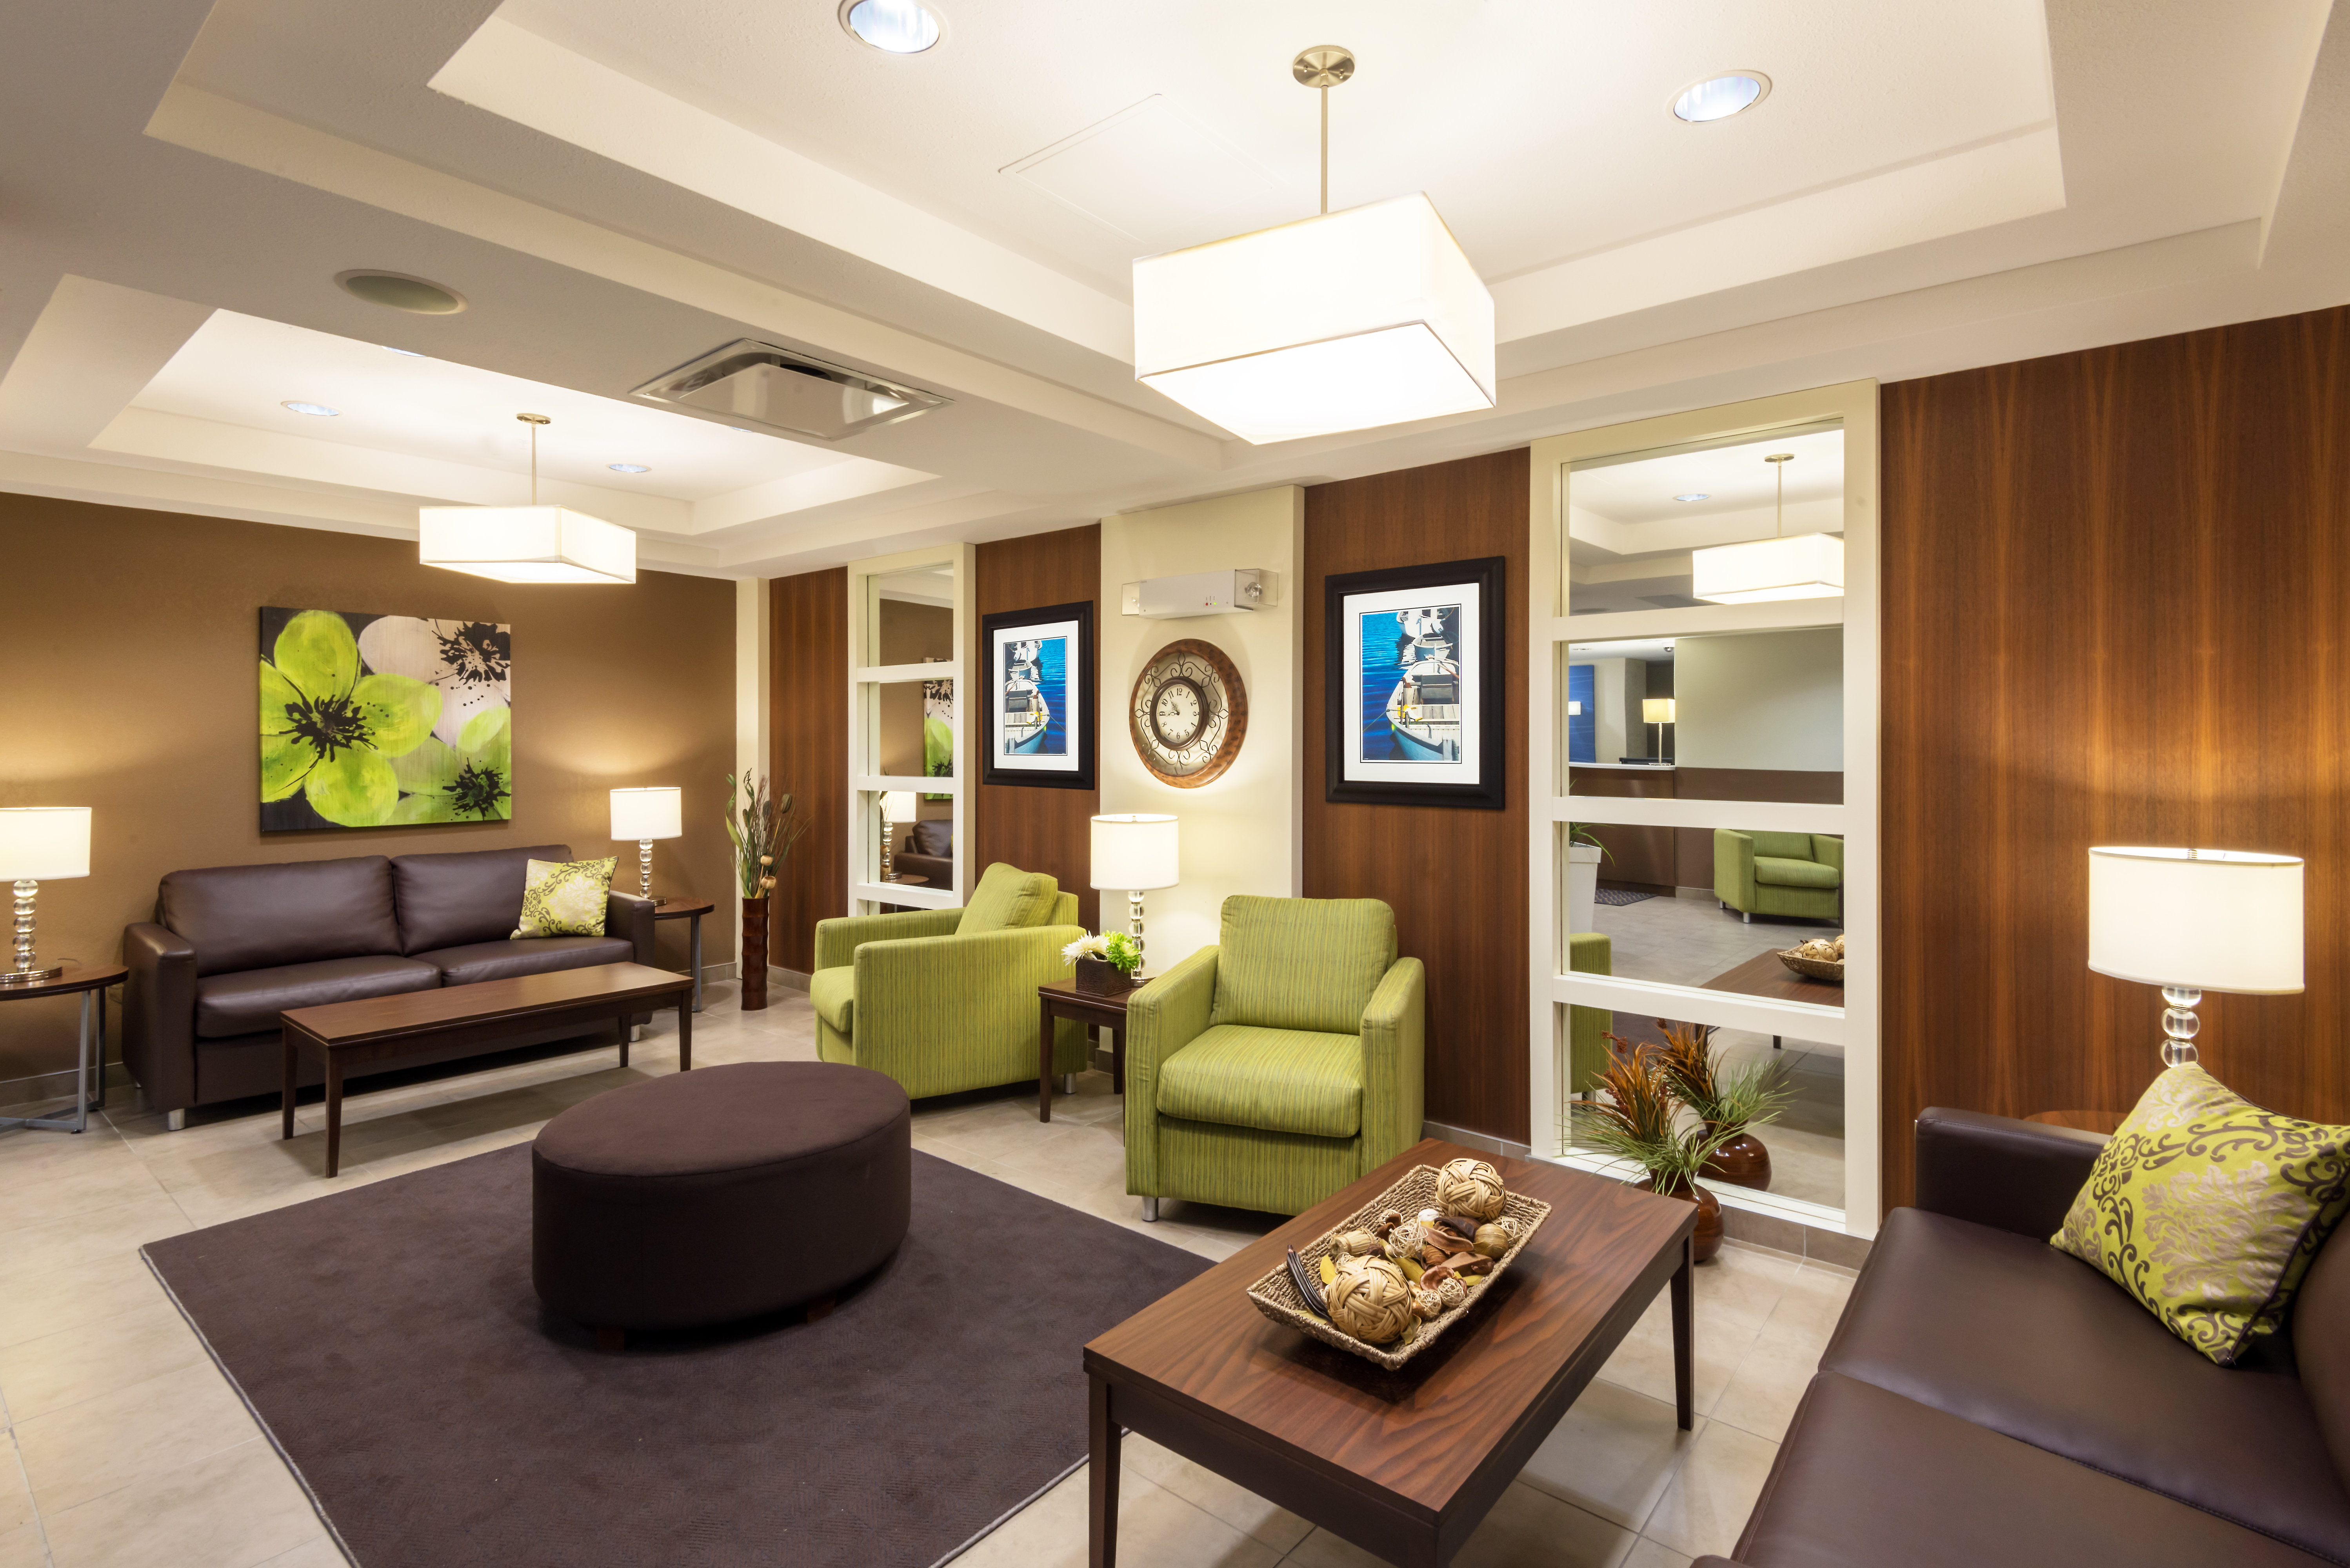 Our lobby waiting area offers seating for your convenience.